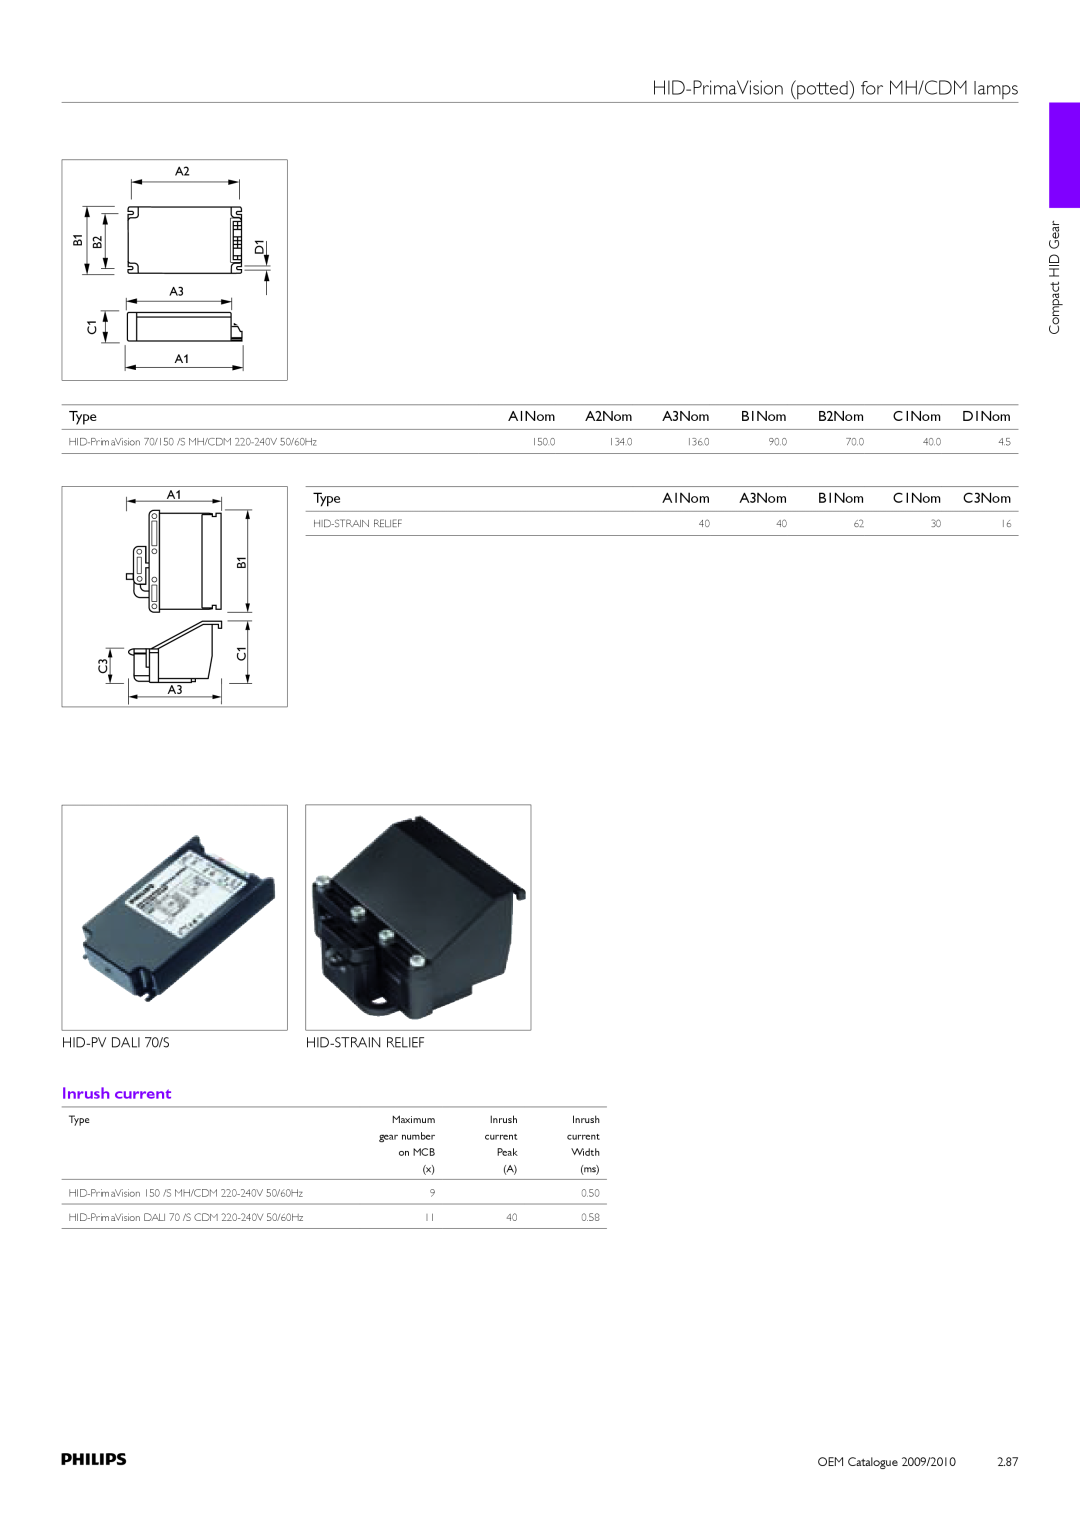 Philips Compact HID Lamp and Gear manual HID-PrimaVisionpotted for MH/CDM lamps, Inrush current 